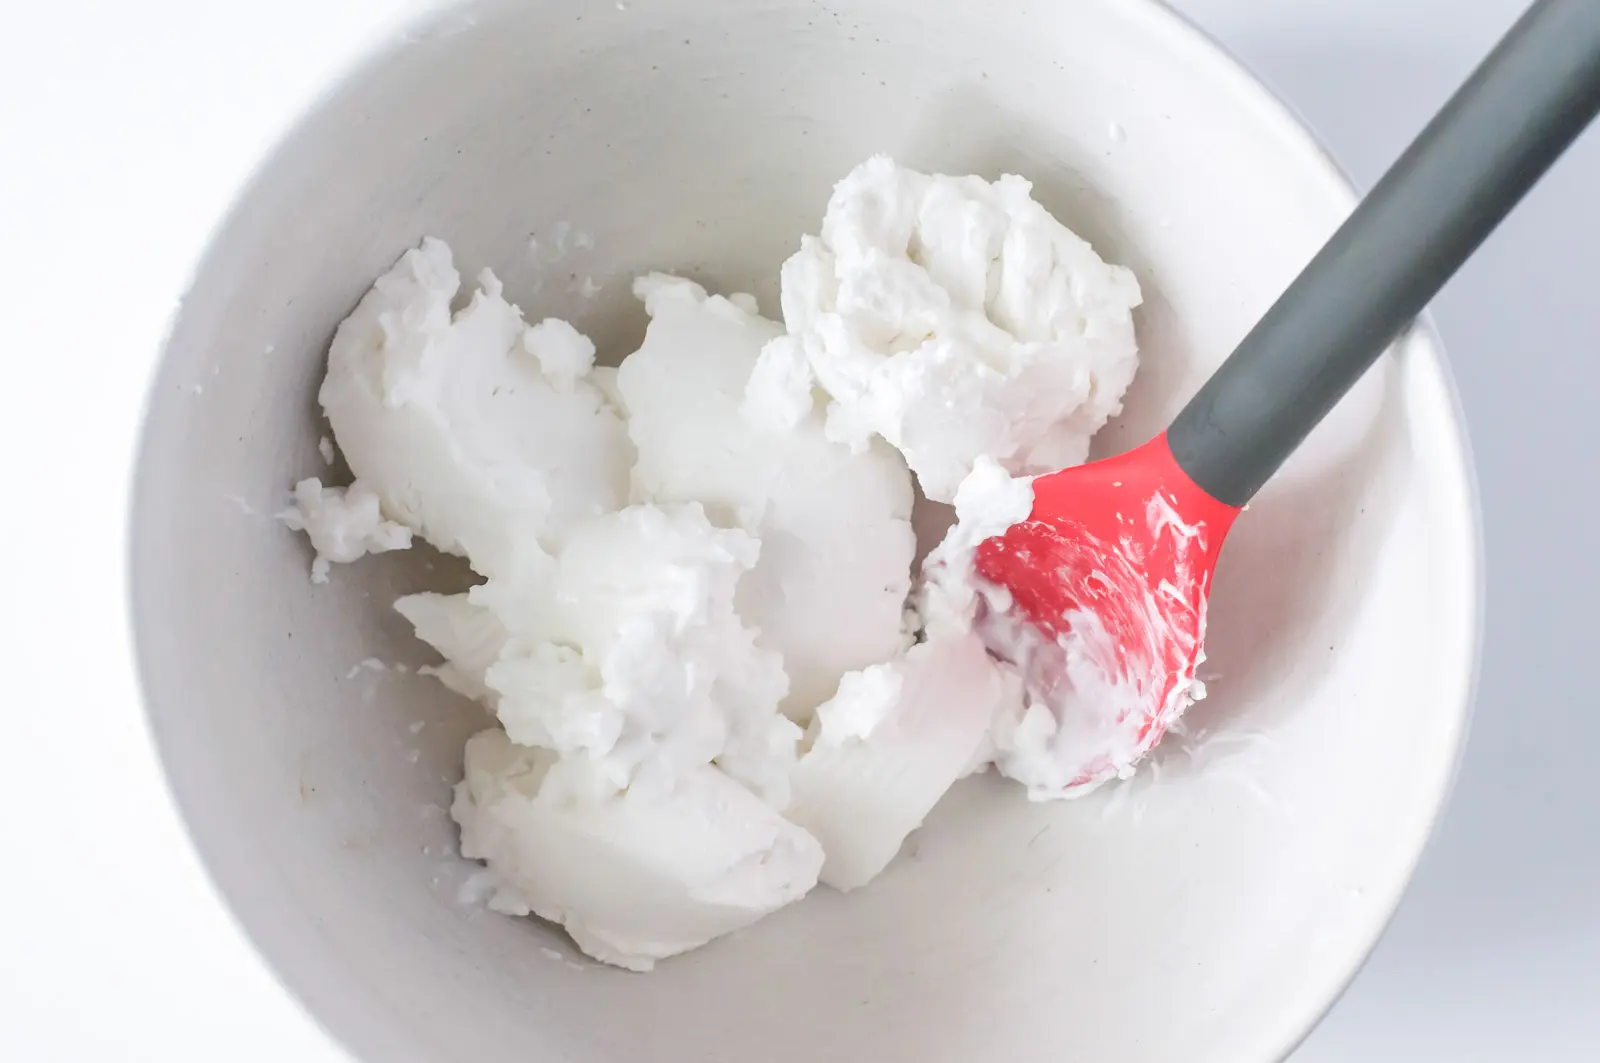 How to Make Vegan Coconut Whipped Cream: Add the creamy, firm coconut milk to a chilled bowl